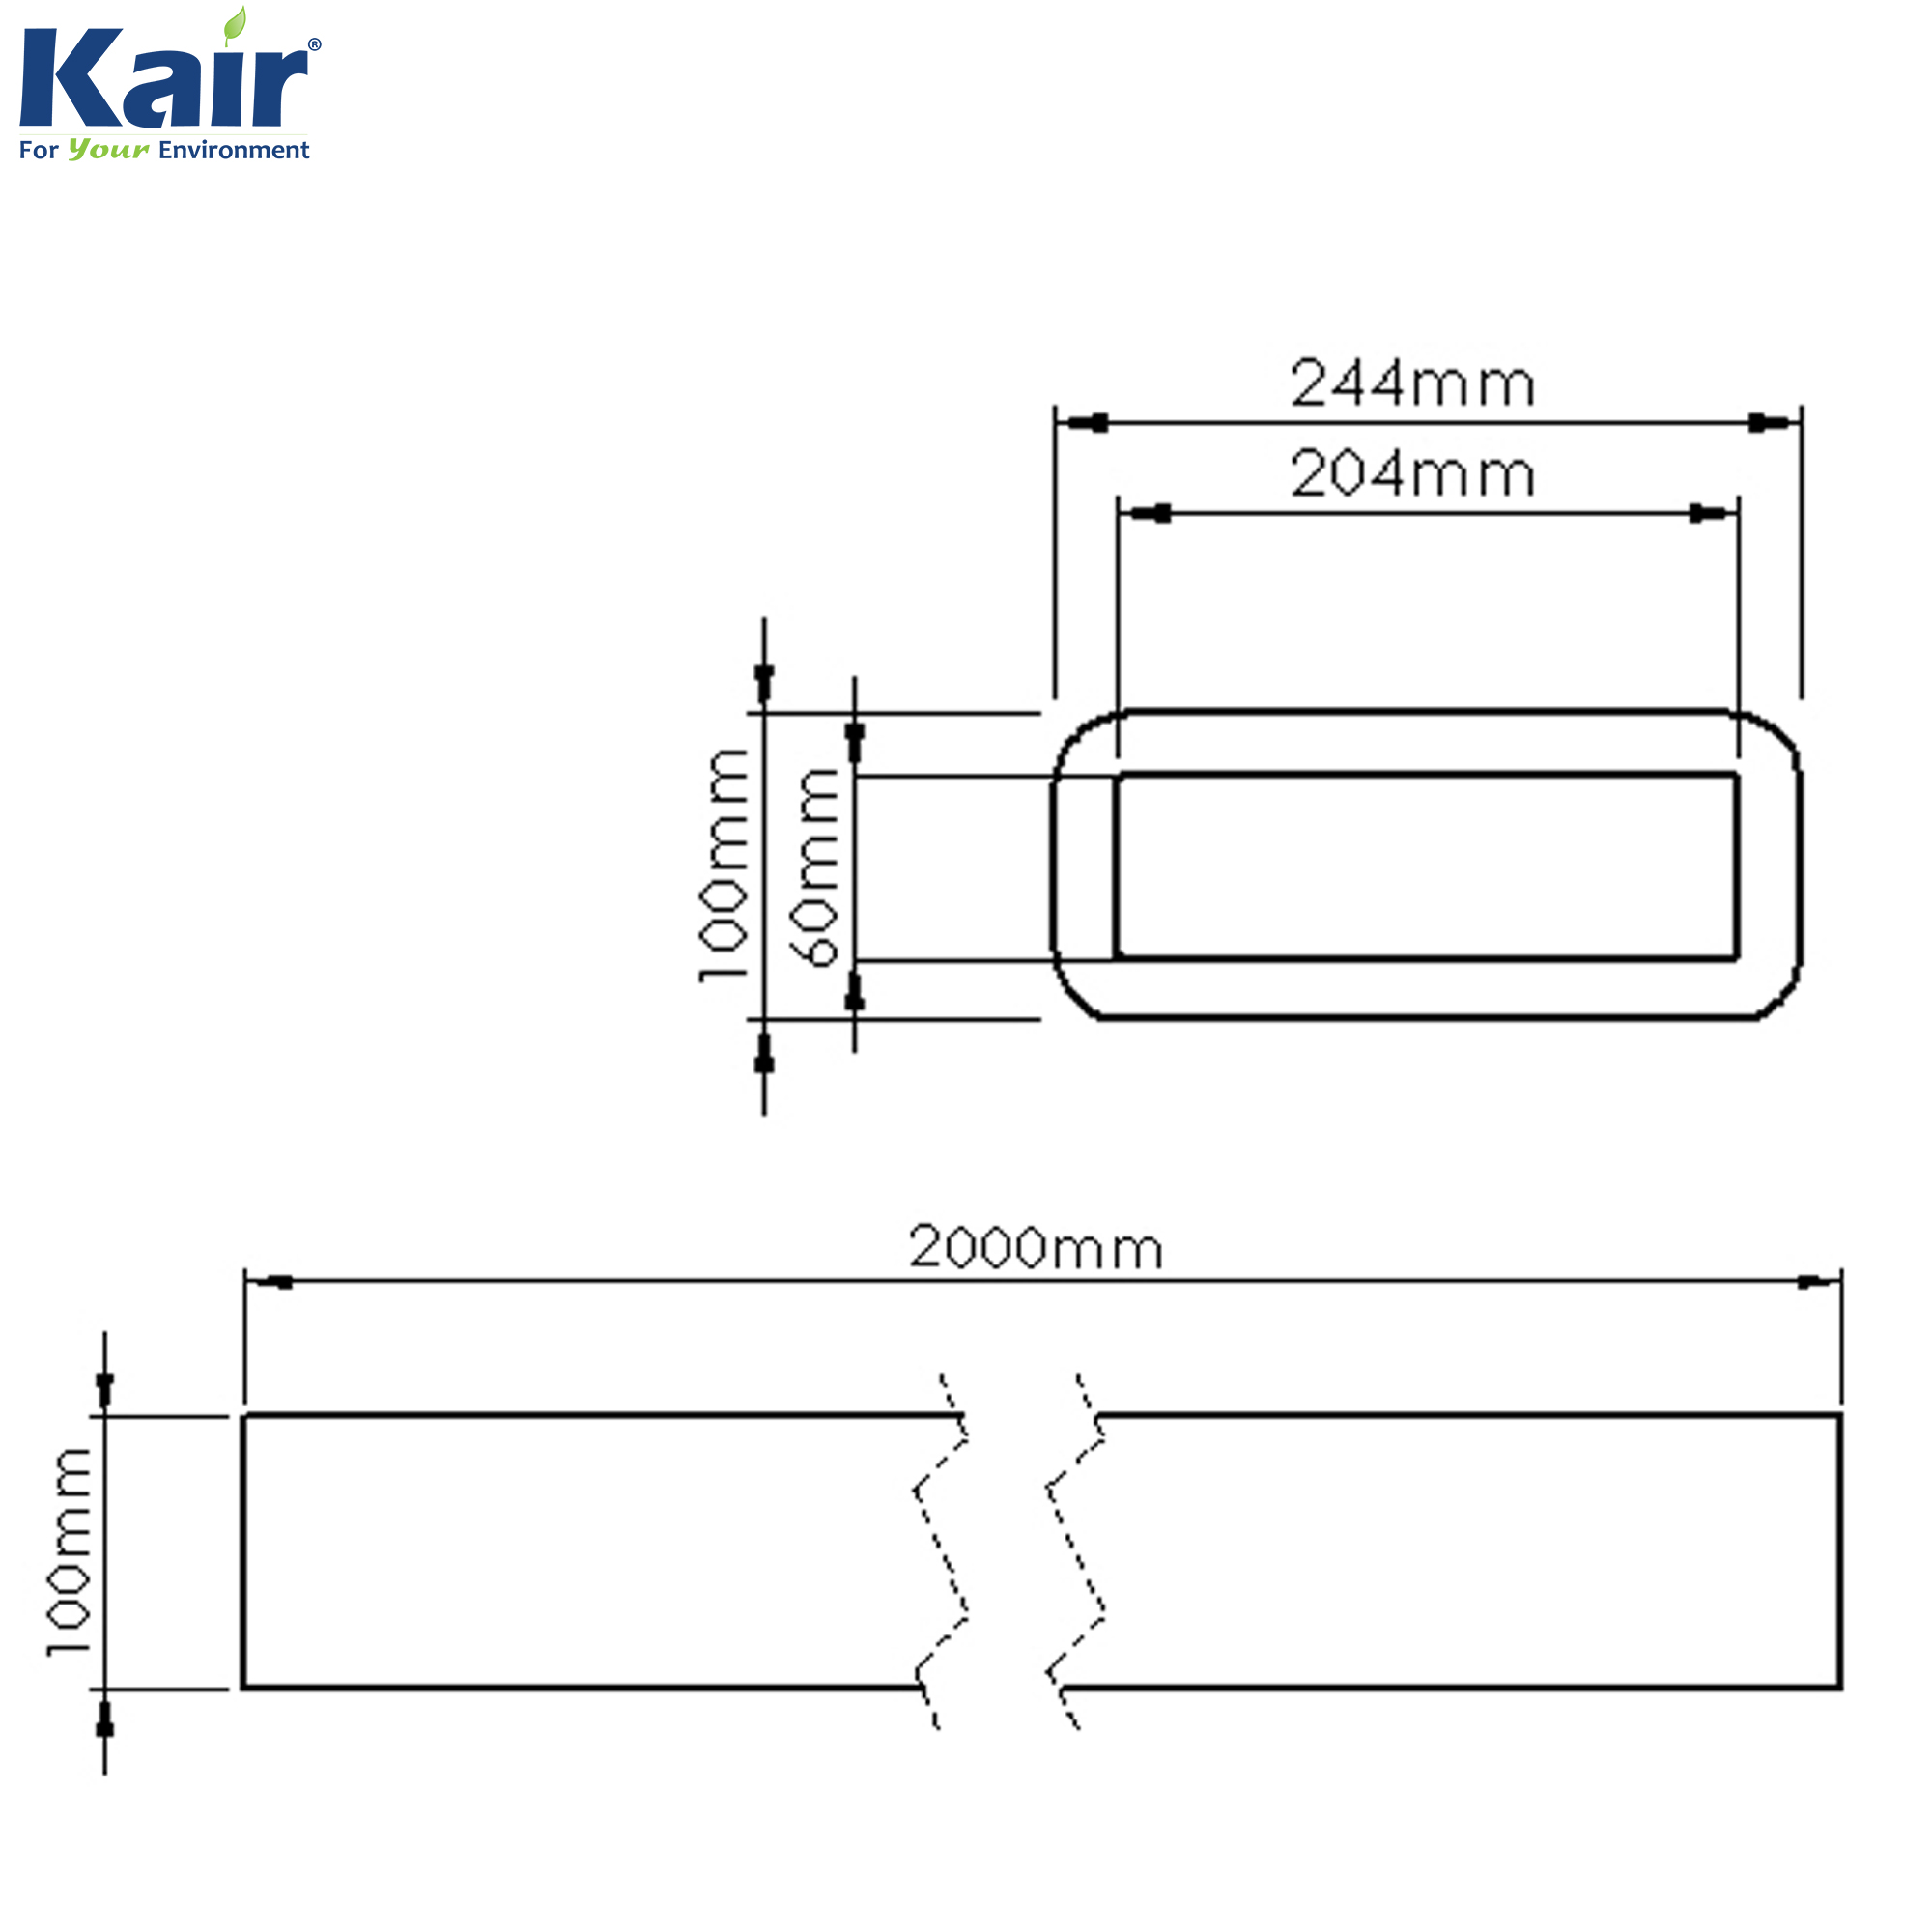 Kair Self-Seal Thermal Ducting 204X60mm 2 Metre Length Complete With 2 Male Duct To Duct Connectors - Pack of 6